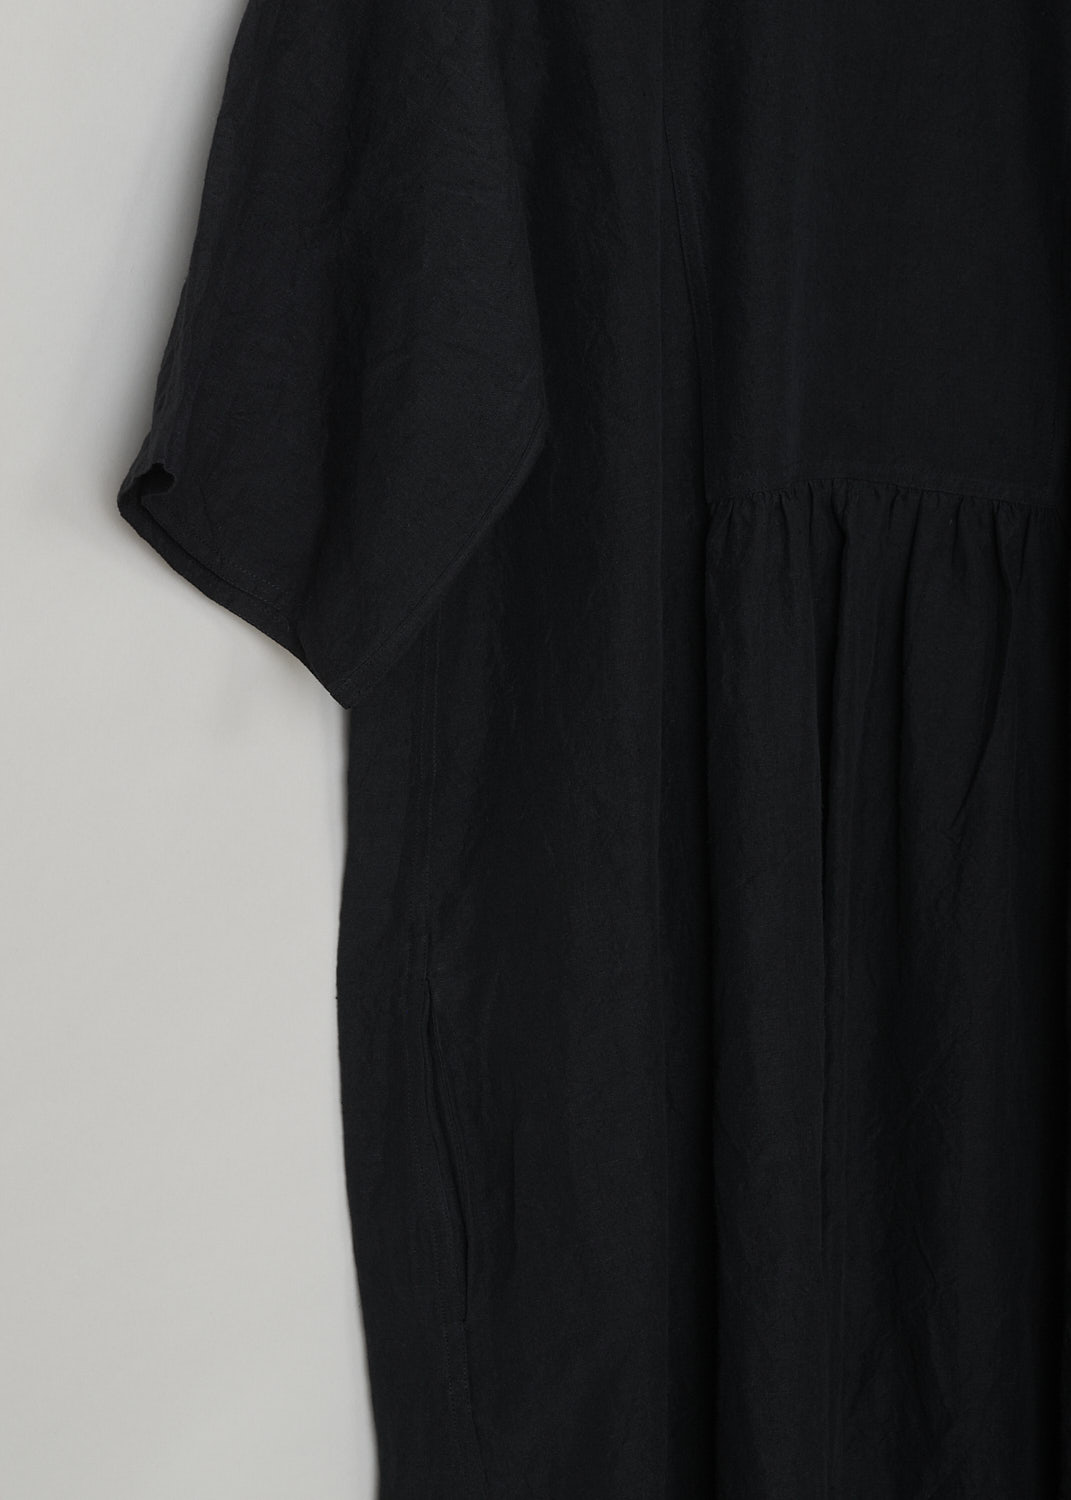 SOFIE Dâ€™HOORE, BLACK LINEN DARNELLE DRESS, DARNELLE_LIFE_BLACK, Black, Detail, This oversized black midi dress features a round neckline, dropped shoulders and short sleeves. The A-line dress has a square bib-like front with pleated details below. Concealed in the side seams, slanted pockets can be found. The dress has a straight hemline with slits on either side. 

